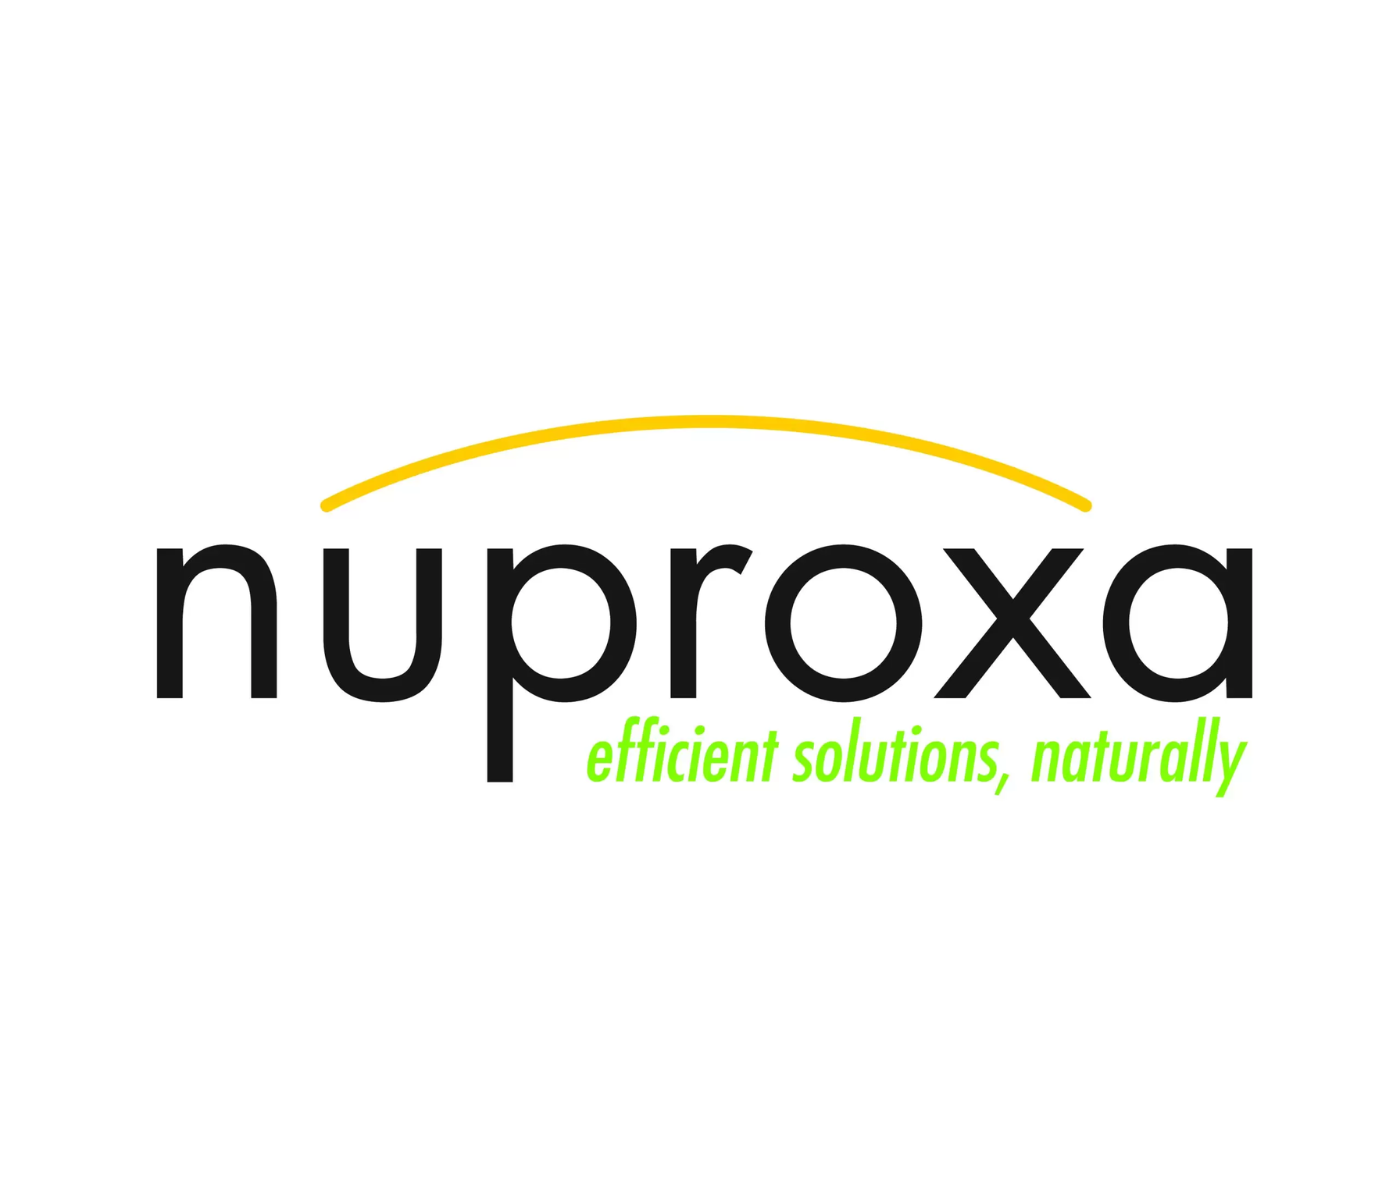 Nuproxa Group Appoints Dr. Goetz Gotterbarm as CEO, ushering in a New Era